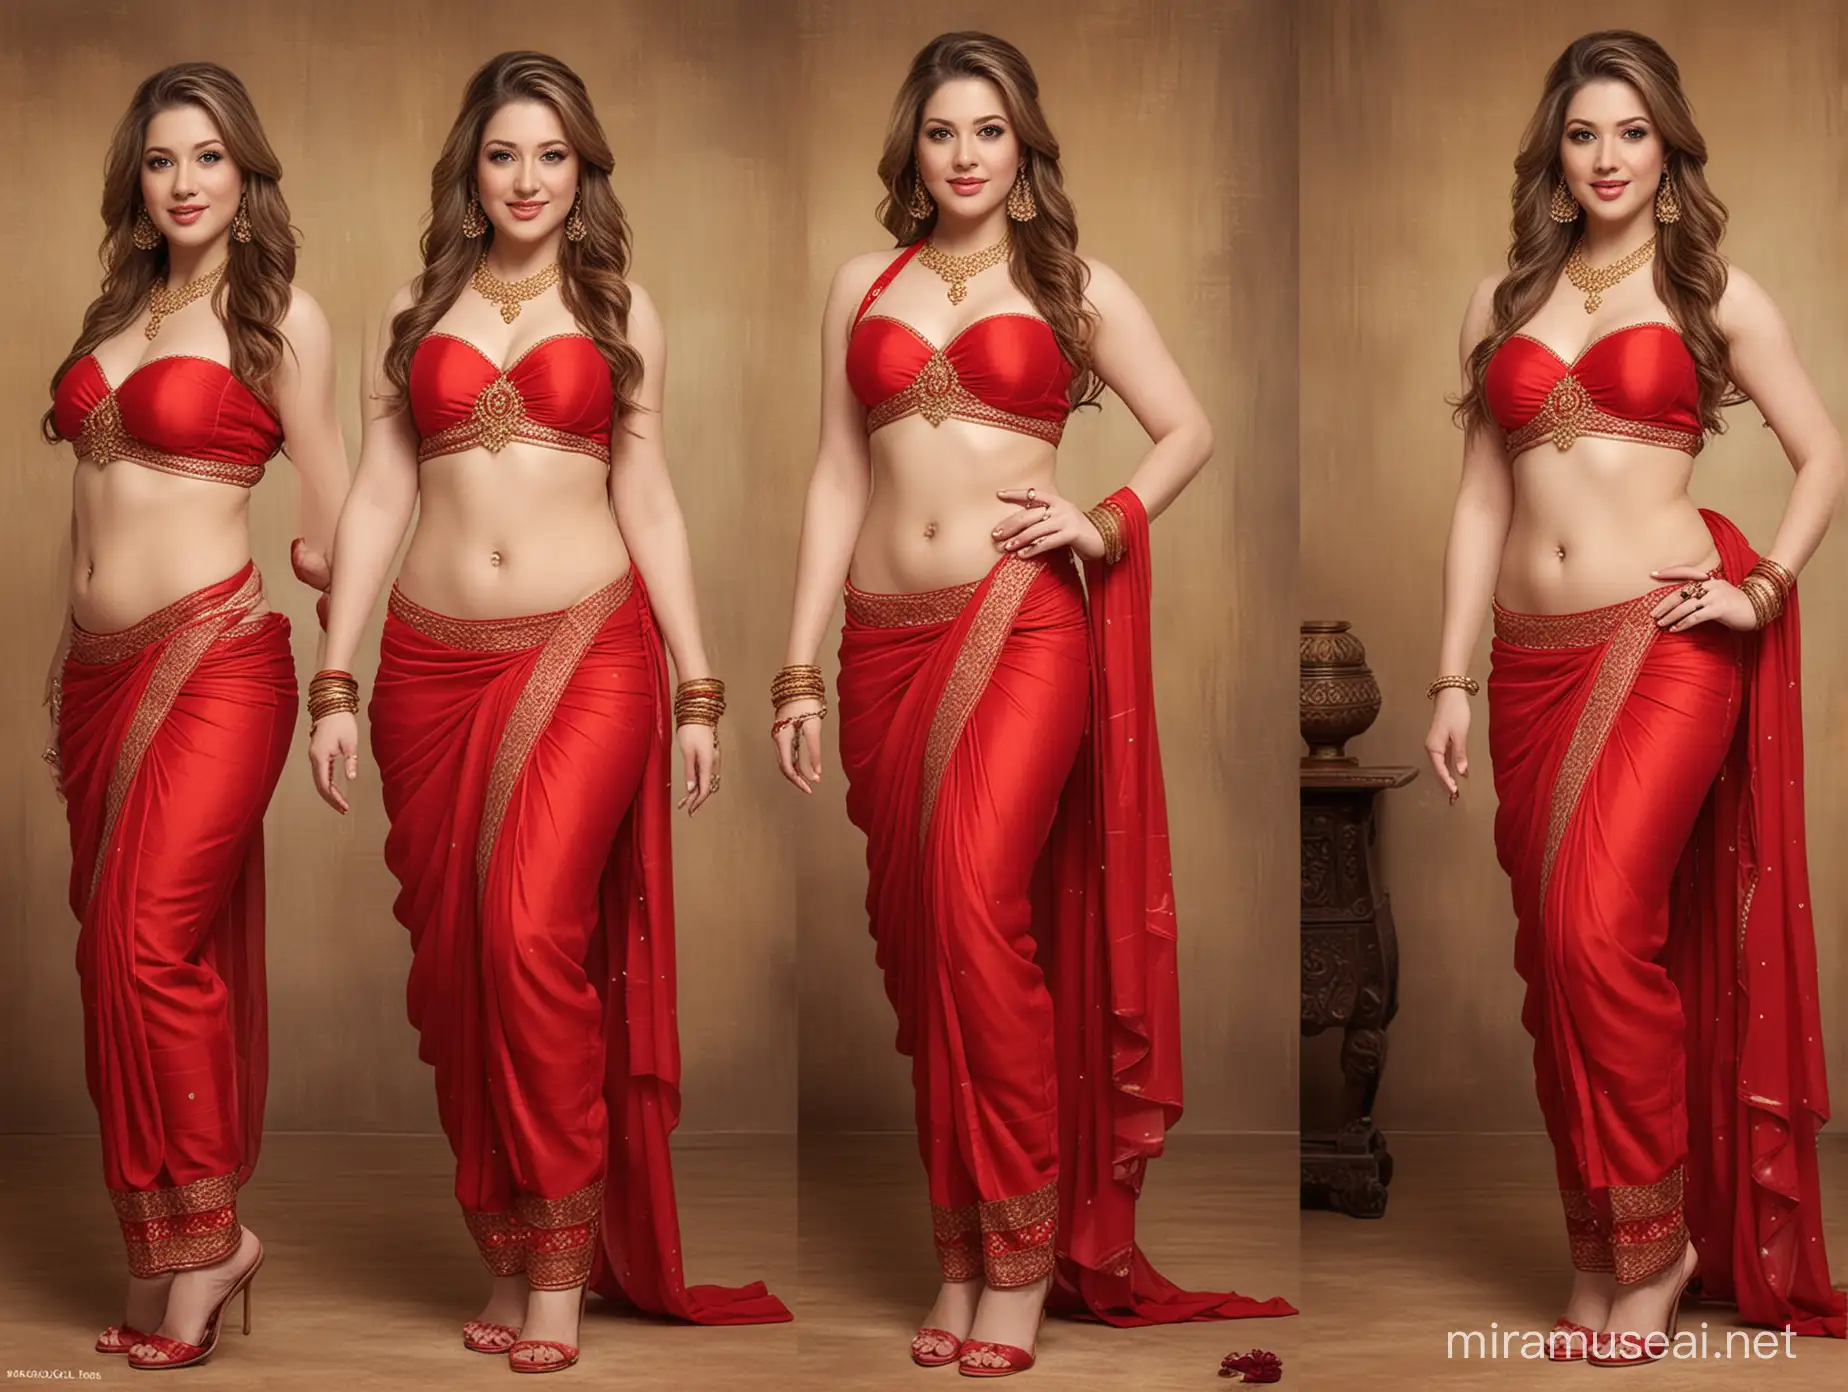 Sunny Lane in Traditional Red Lingerie and Saree with Indian Accessories